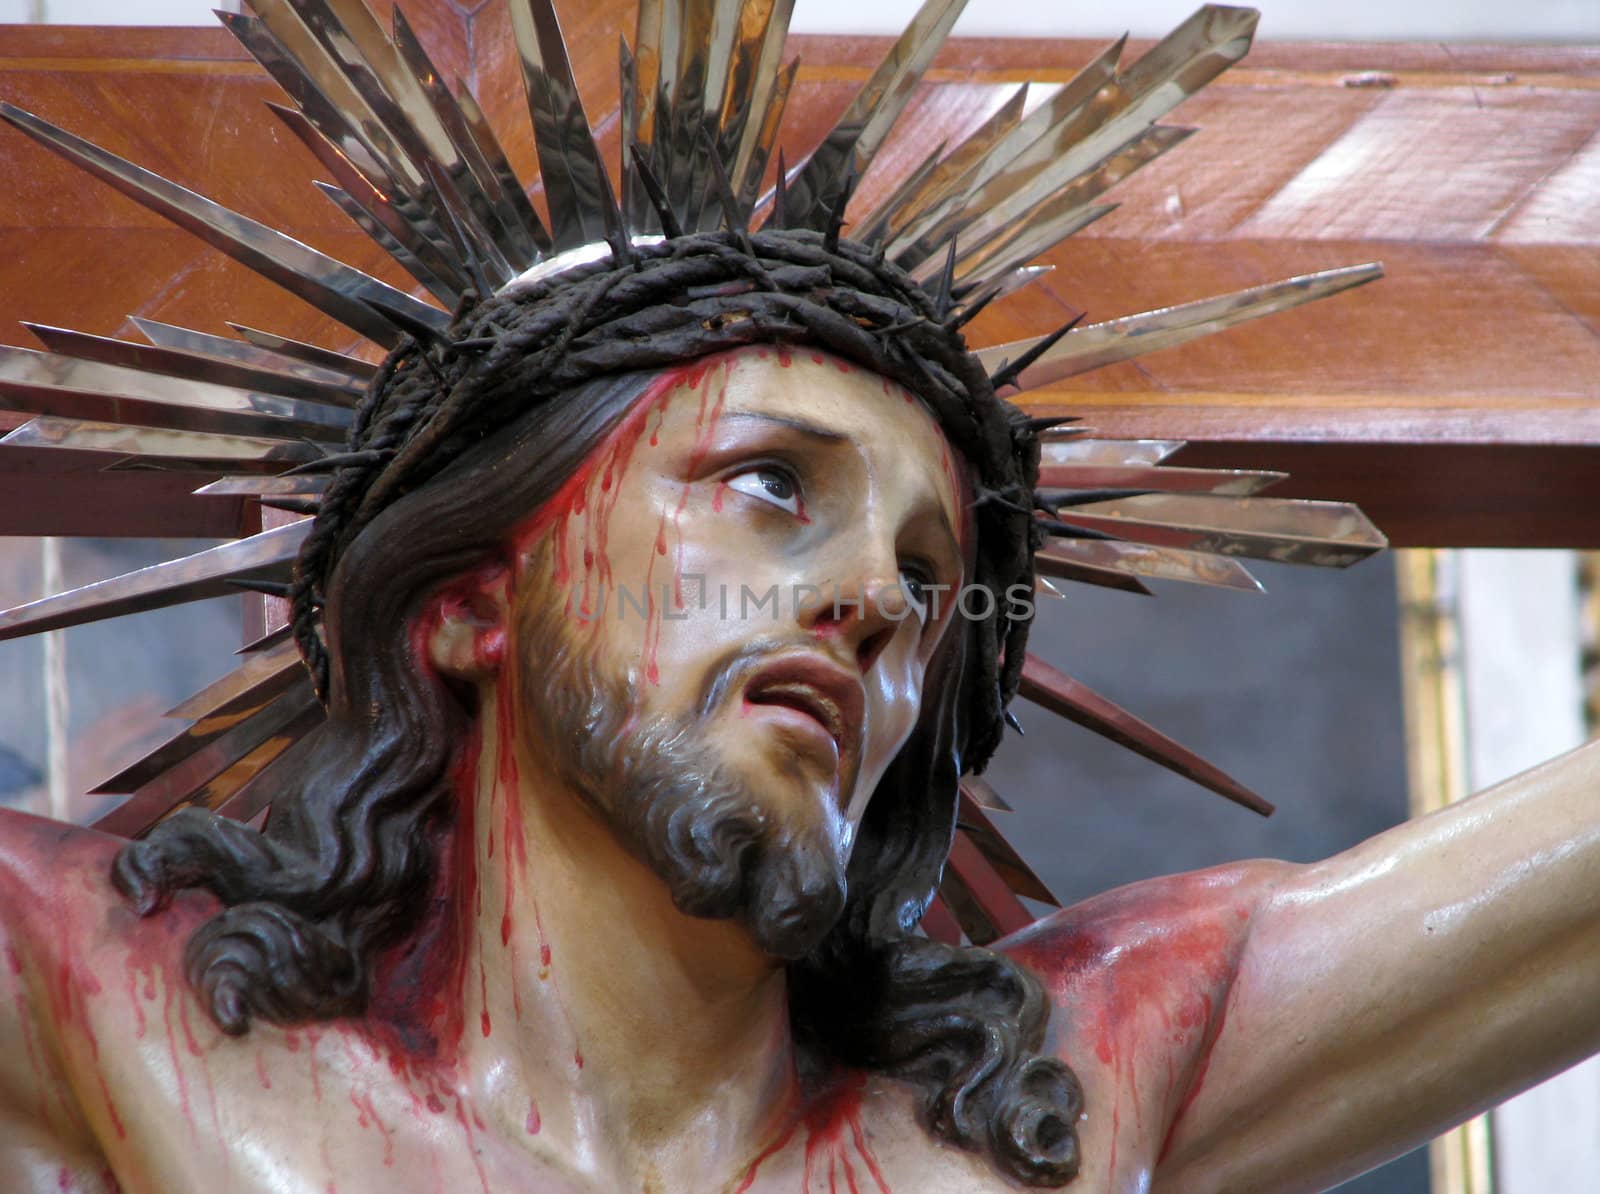 A detail of the face of Jesus from a group of statues portraying 'The Crucifixion' in Mosta, Malta.